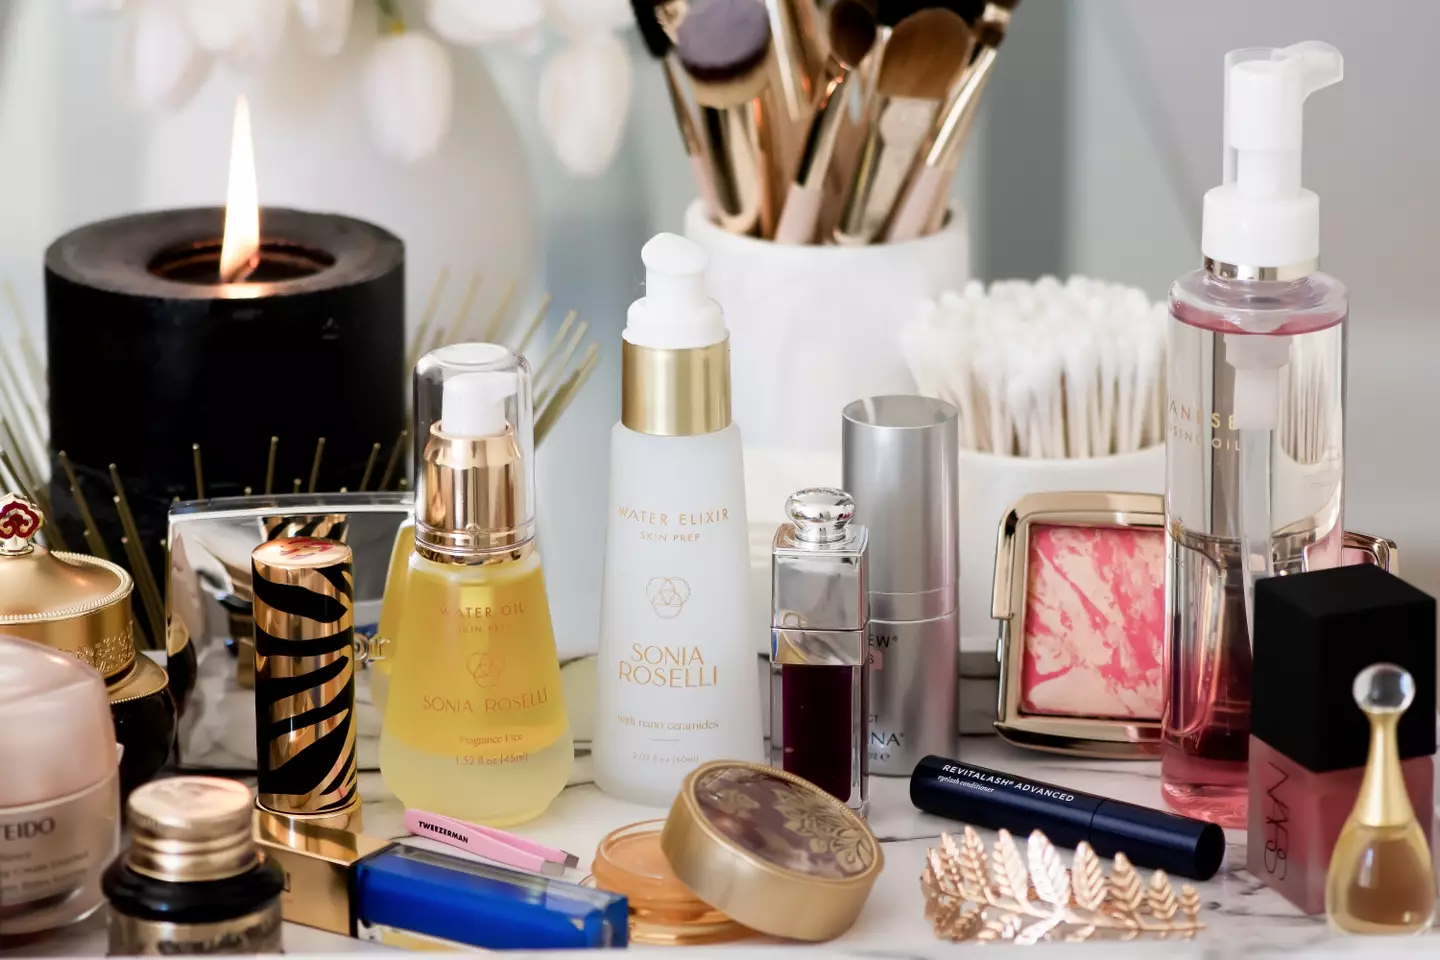 According to experts, makeup is a huge no-no. (